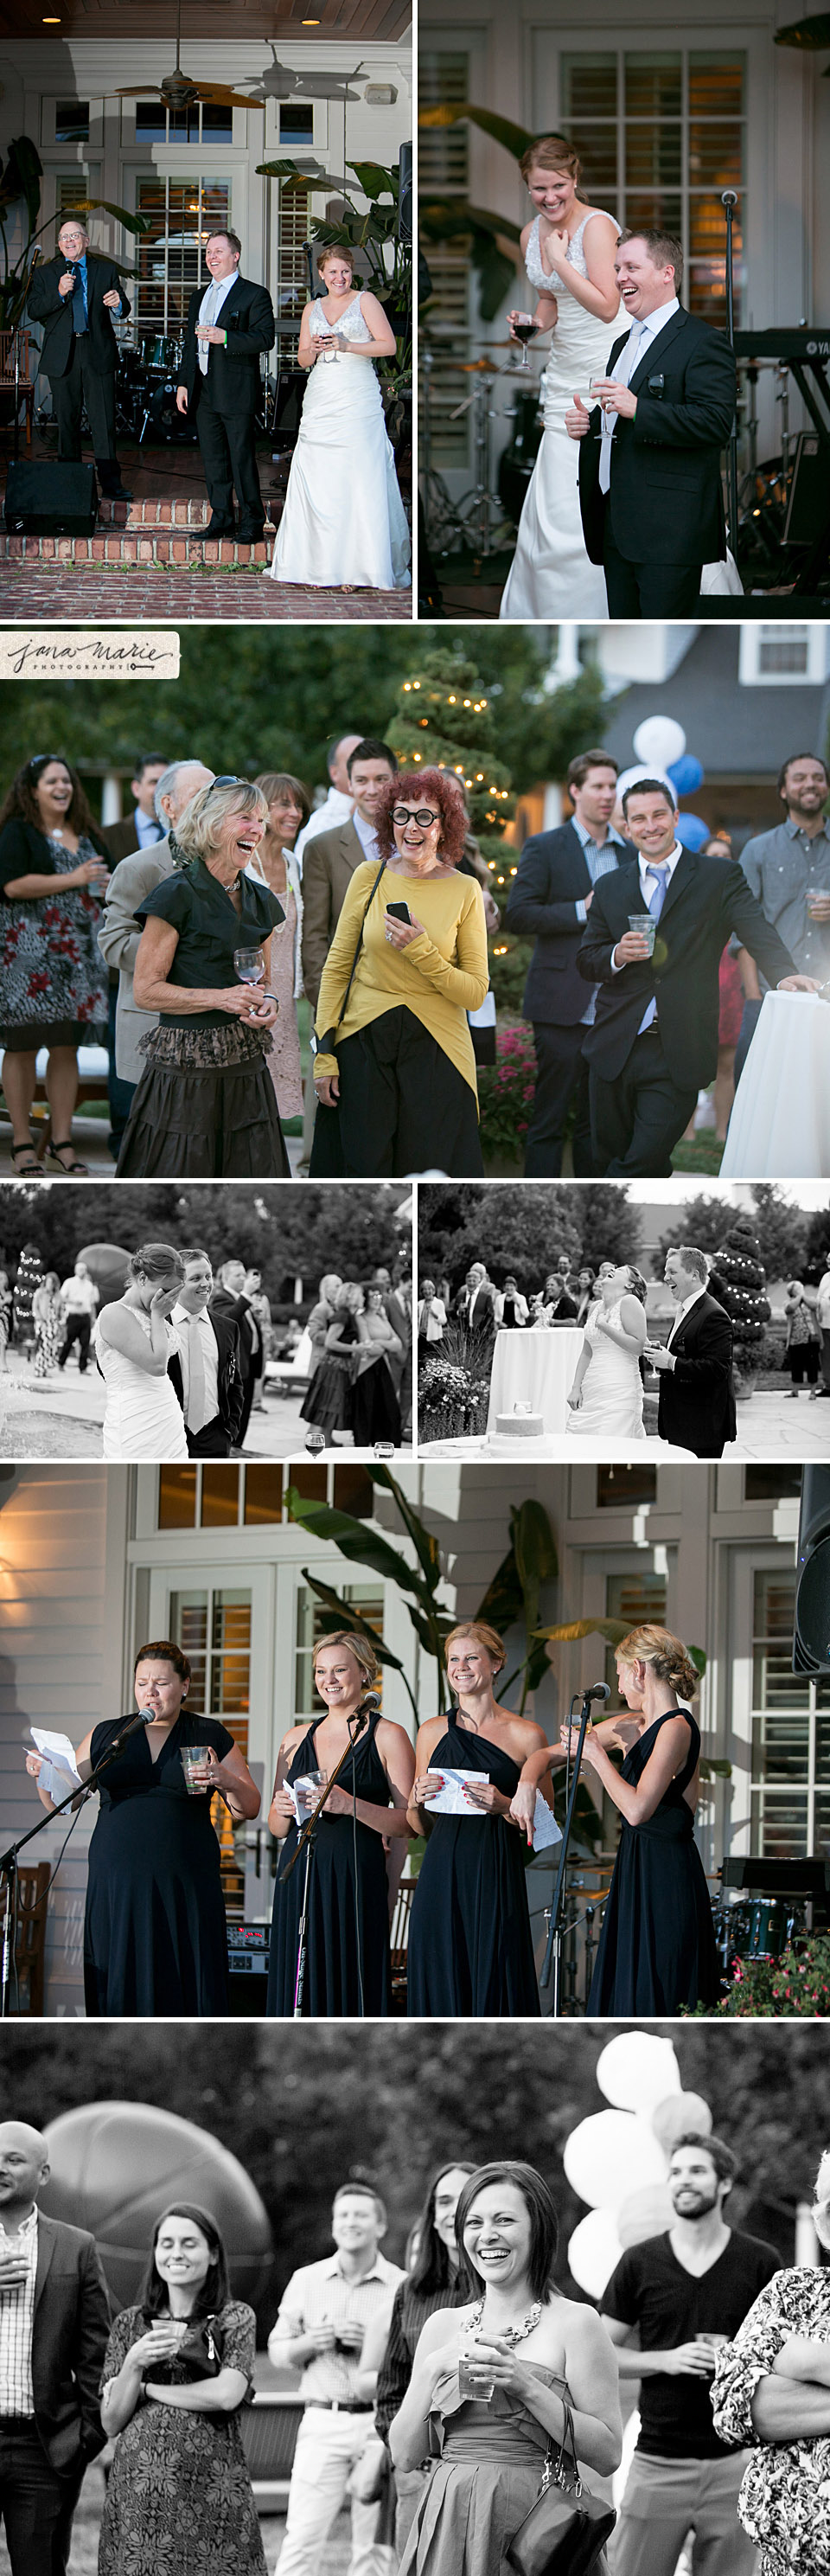 Old Lawrence, The Comptons, Toasts, Fun weddings, Jana Marie Photography, live bands